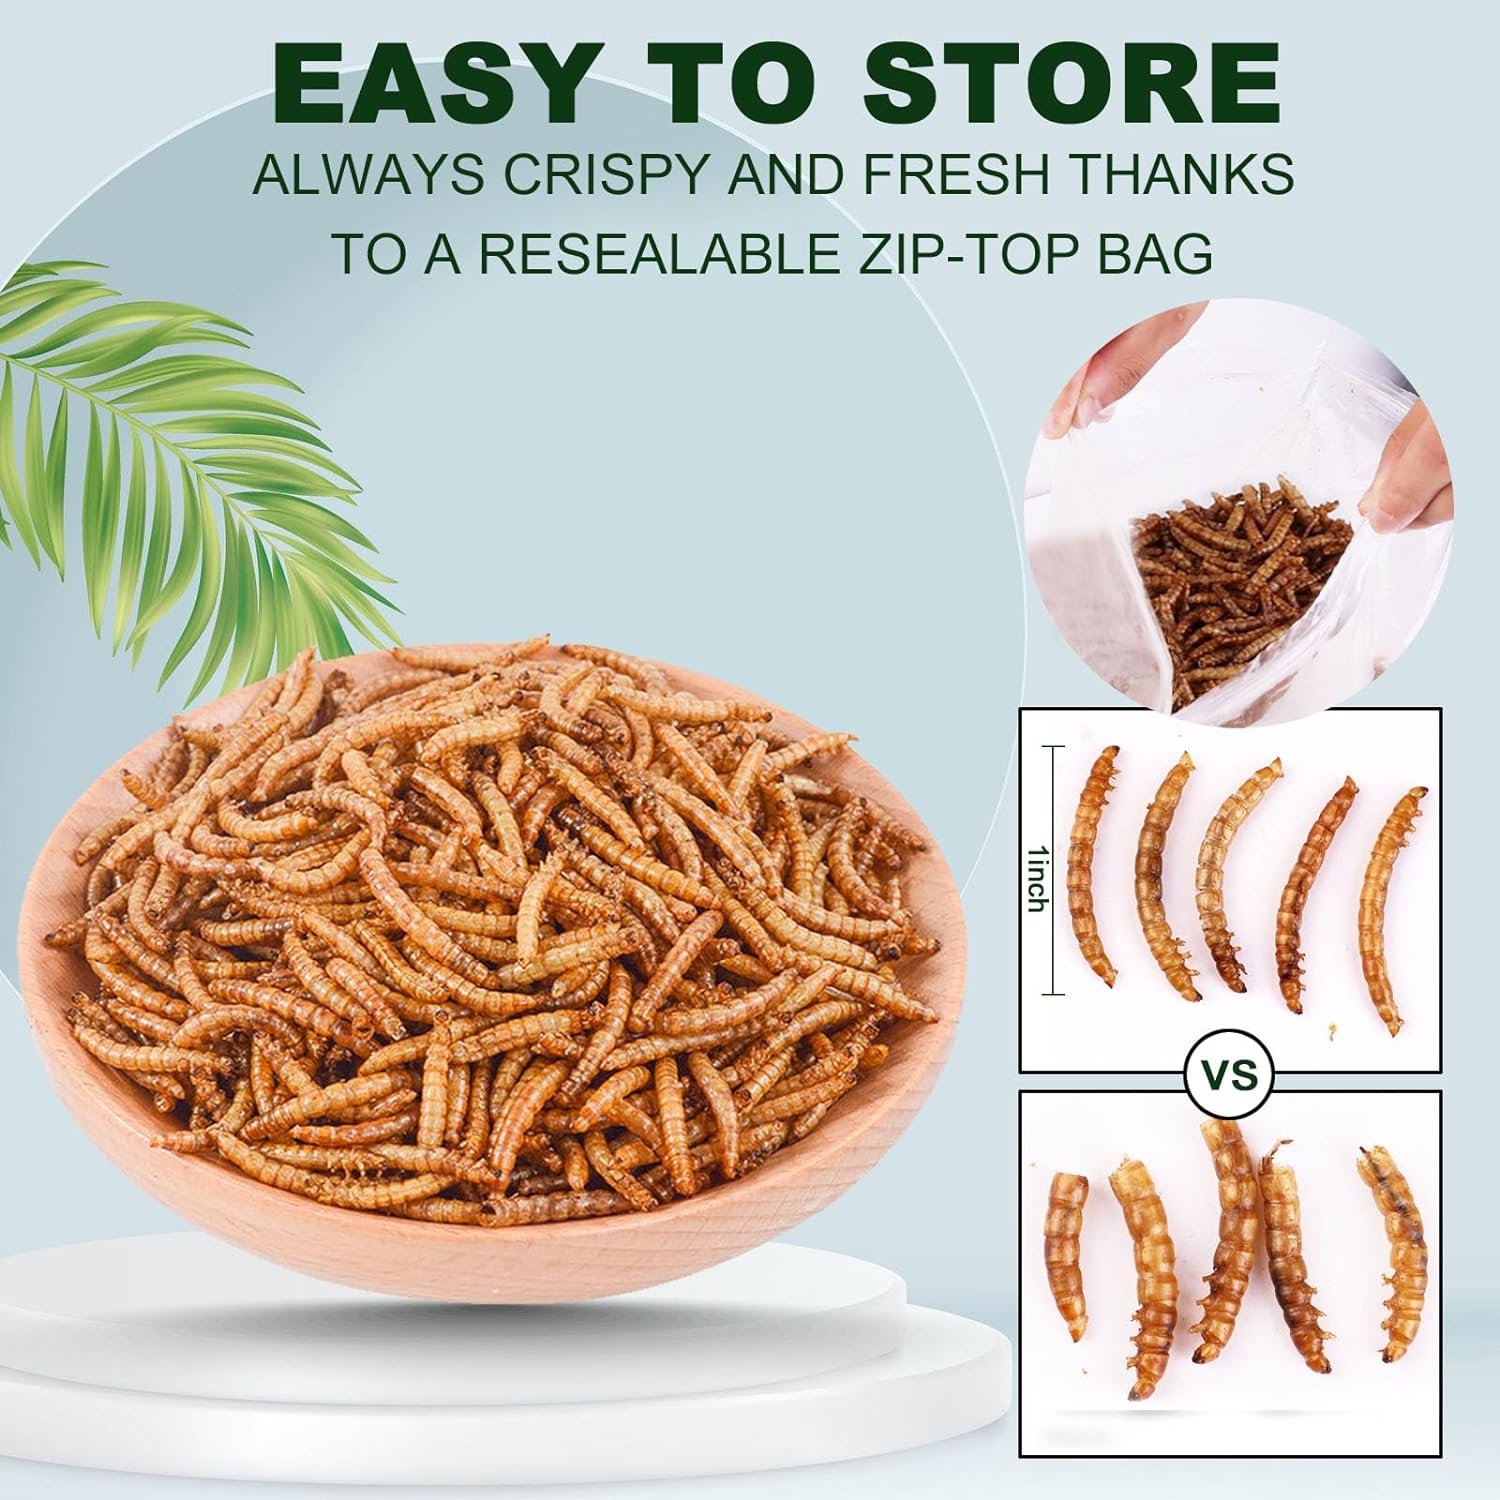 SAMOEY 2.2 LBS Non-GMO Dried Mealworms - Nutritious High Protein Meal Worms - Food and Treats for Laying Hens, Ducks, and Wild Birds - Also Ideal for Reptiles, Fish, Hedgehogs, Turtles